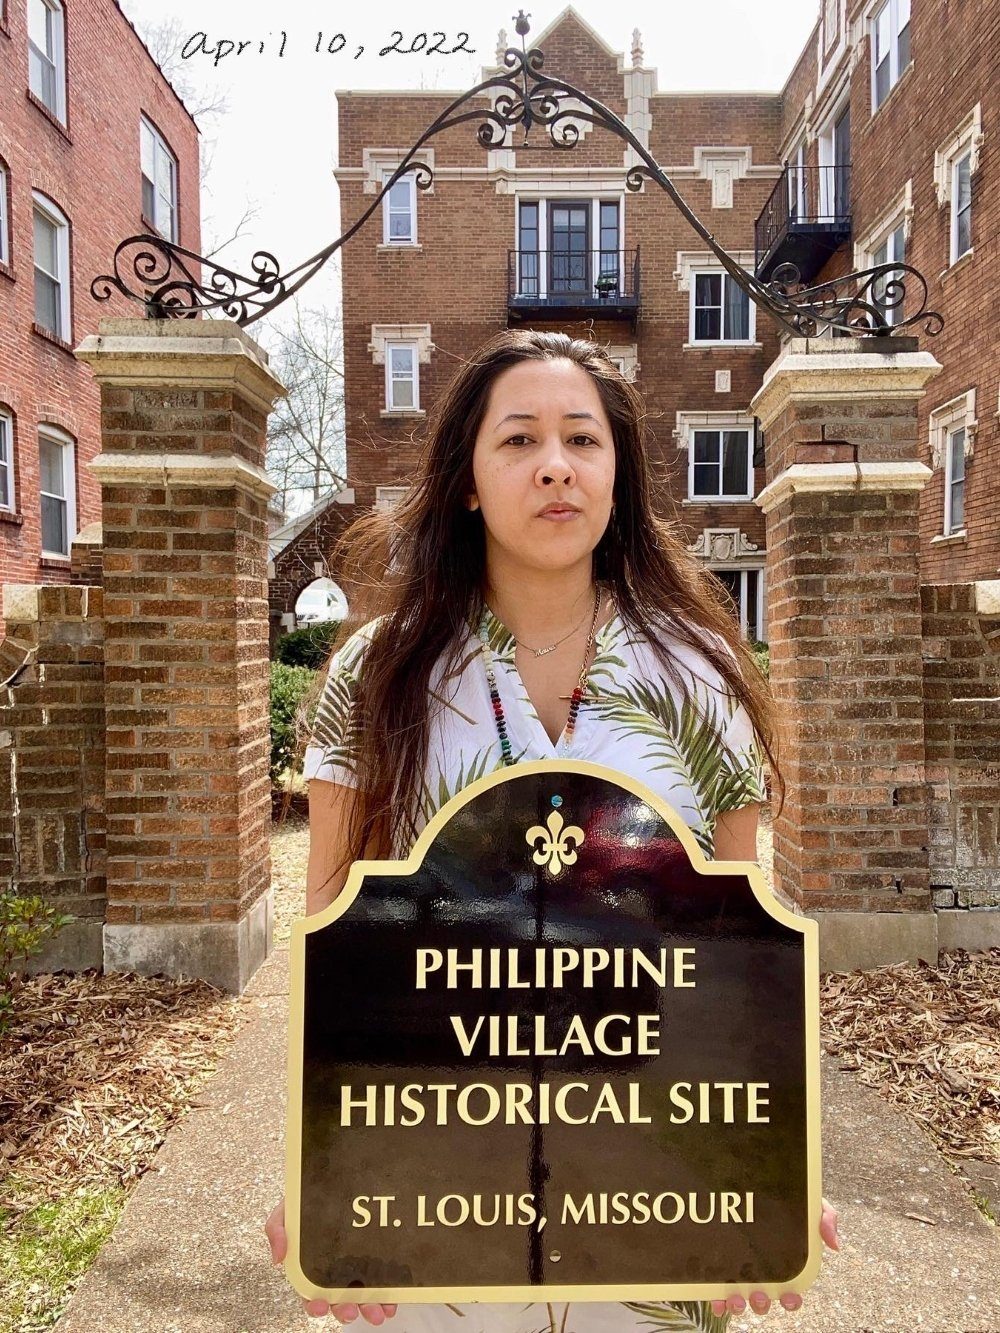 A closer look at the invisible Filipino: Two Fil-Am artists on commemorating the 1904 World’s Fair